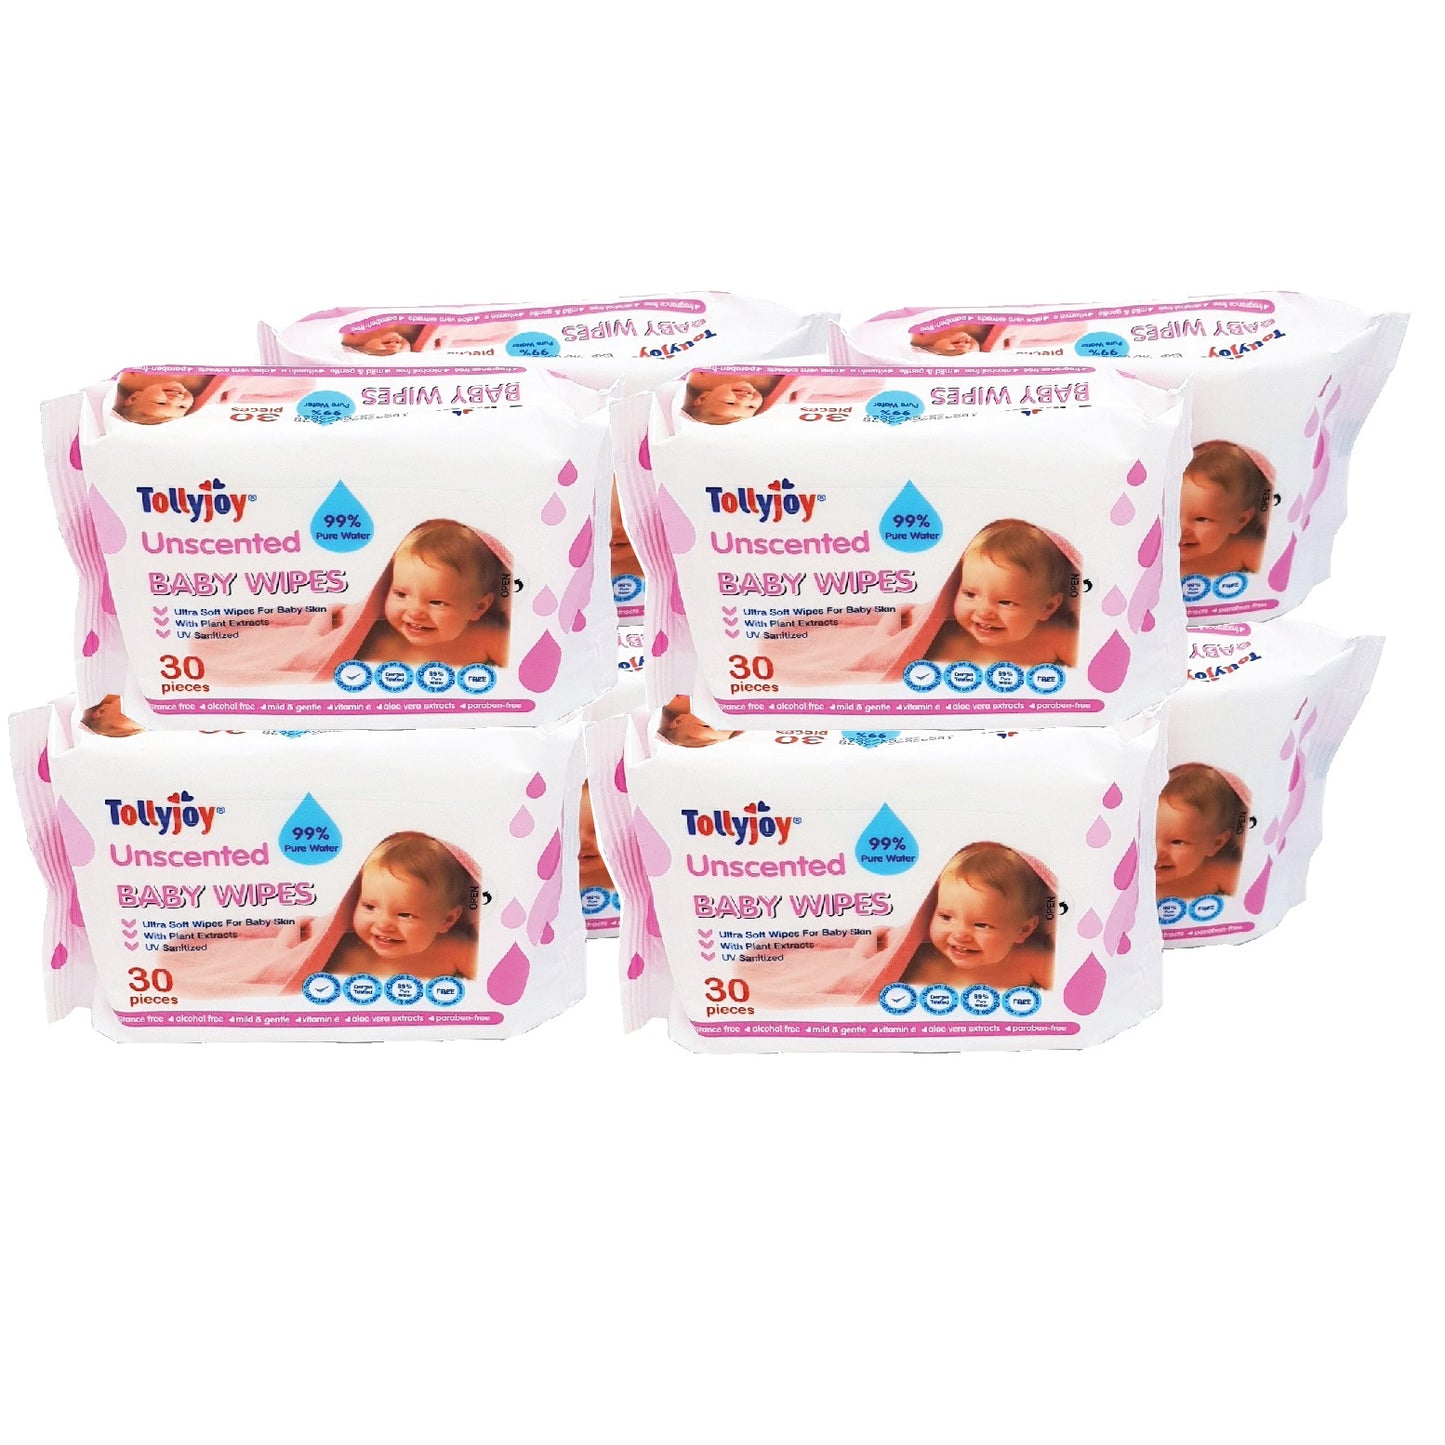 Tollyjoy Unscented Travel Wet Wipes 8 x 30s (Bundle Set)